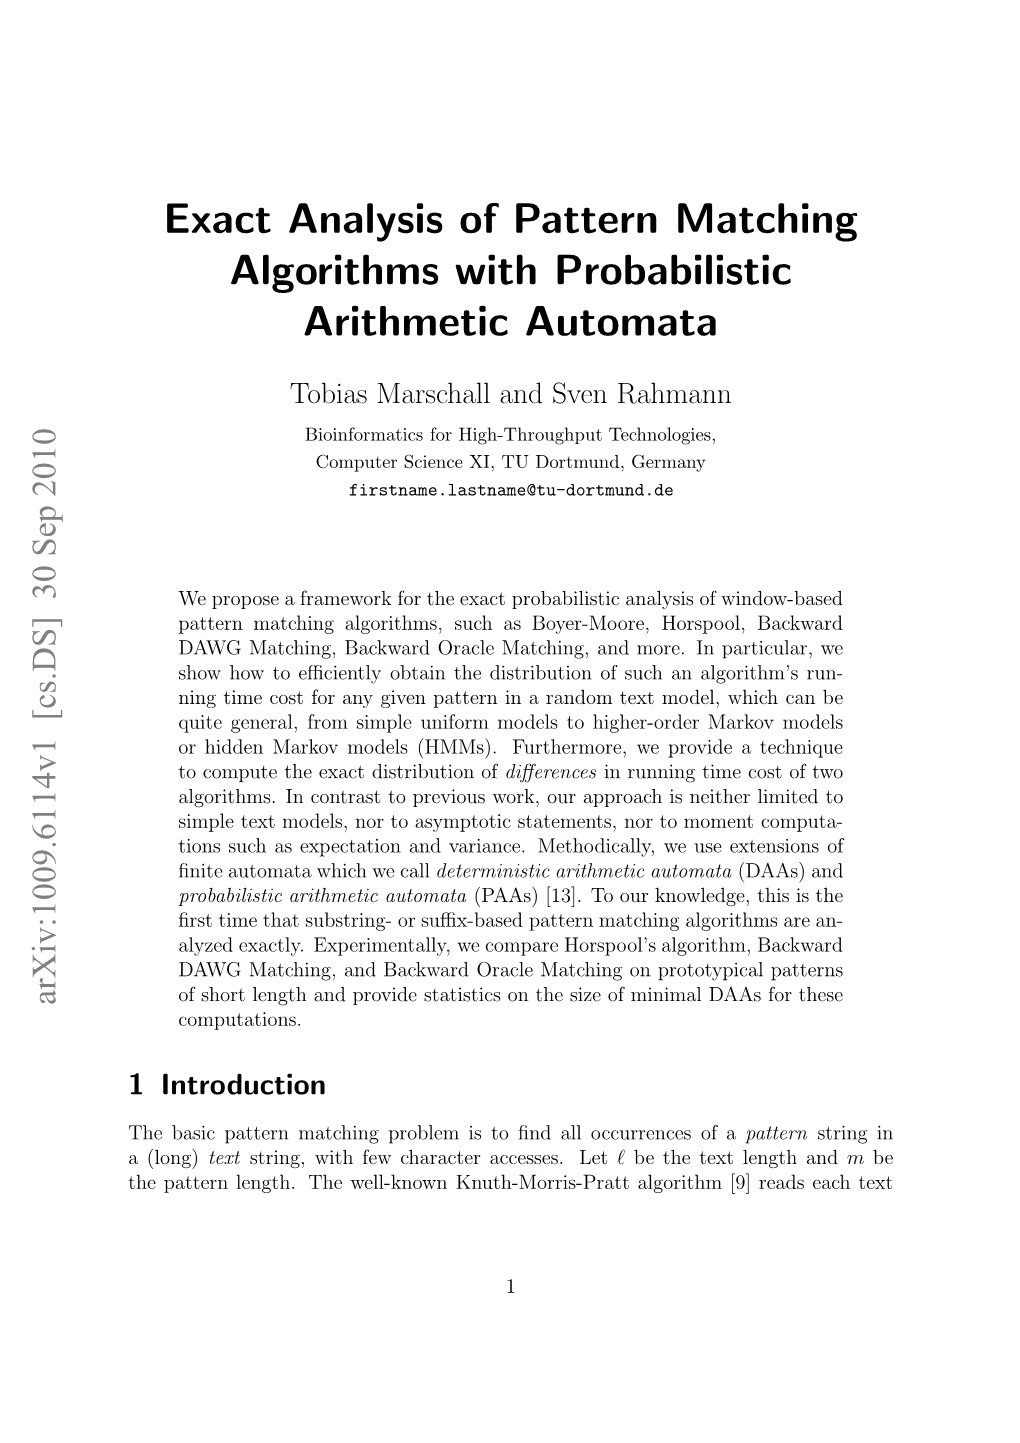 Exact Analysis of Pattern Matching Algorithms with Probabilistic